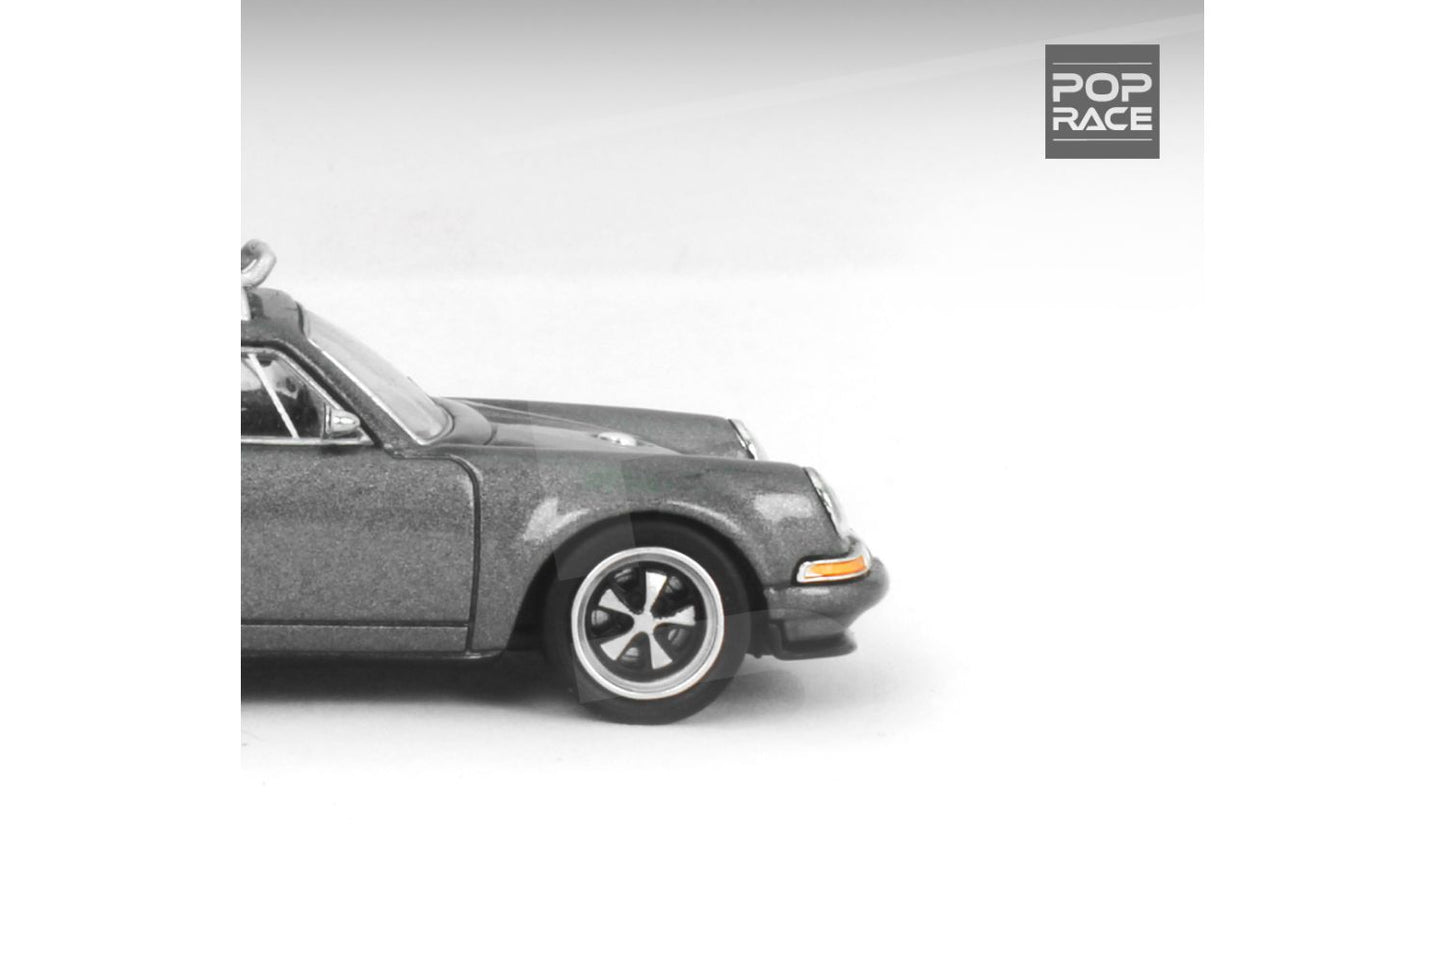 Pop Race 1/64 Singer Porsche 911 (964) in Gray with Roof Rack and Luggage